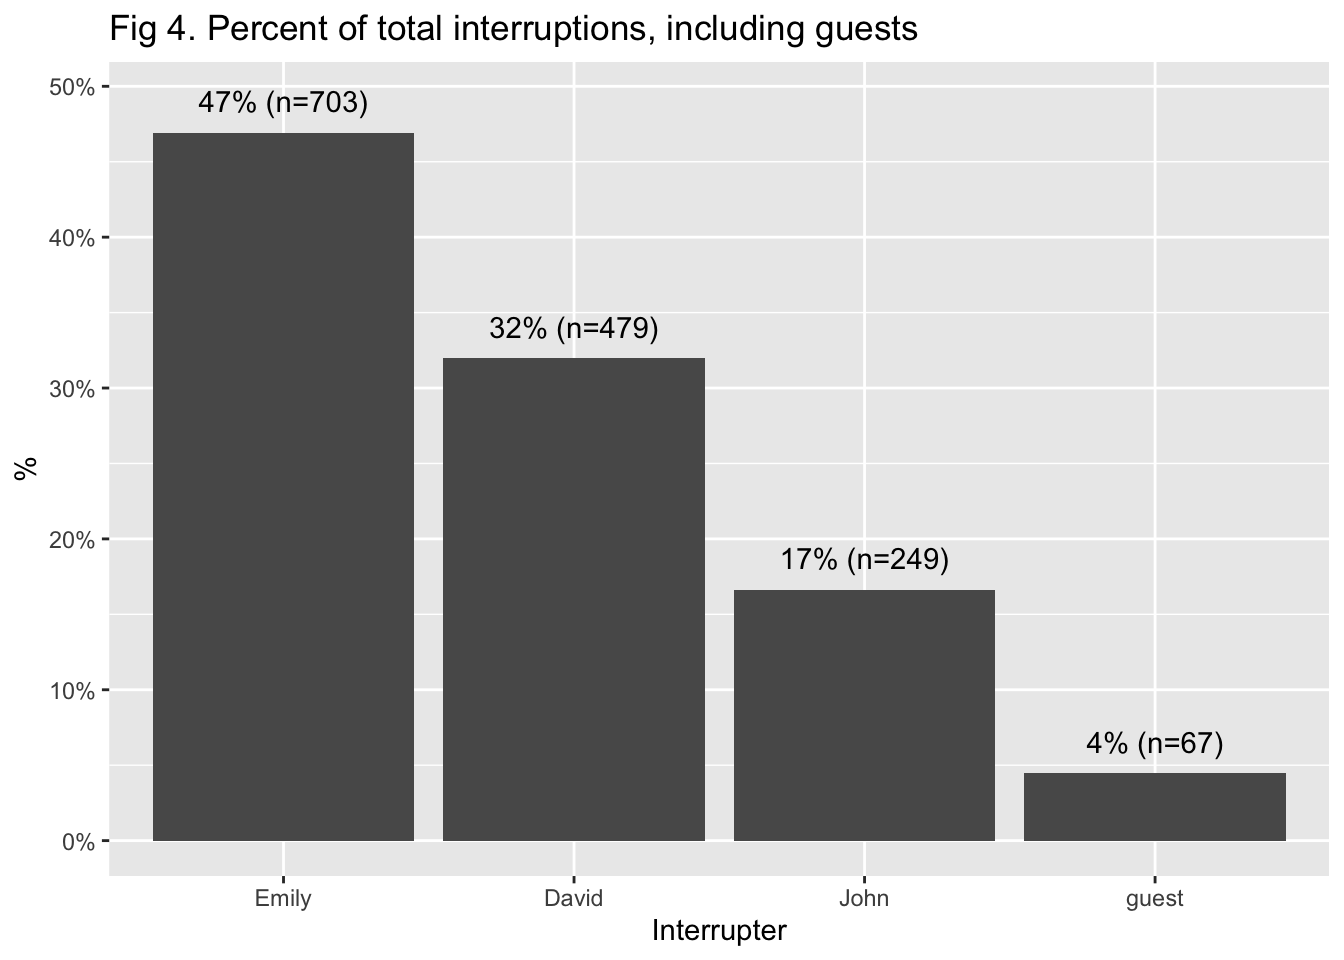 Figure 4 Percent of total interruptions, including guests. Shows guests are only responsible for 4% of all interruptions.